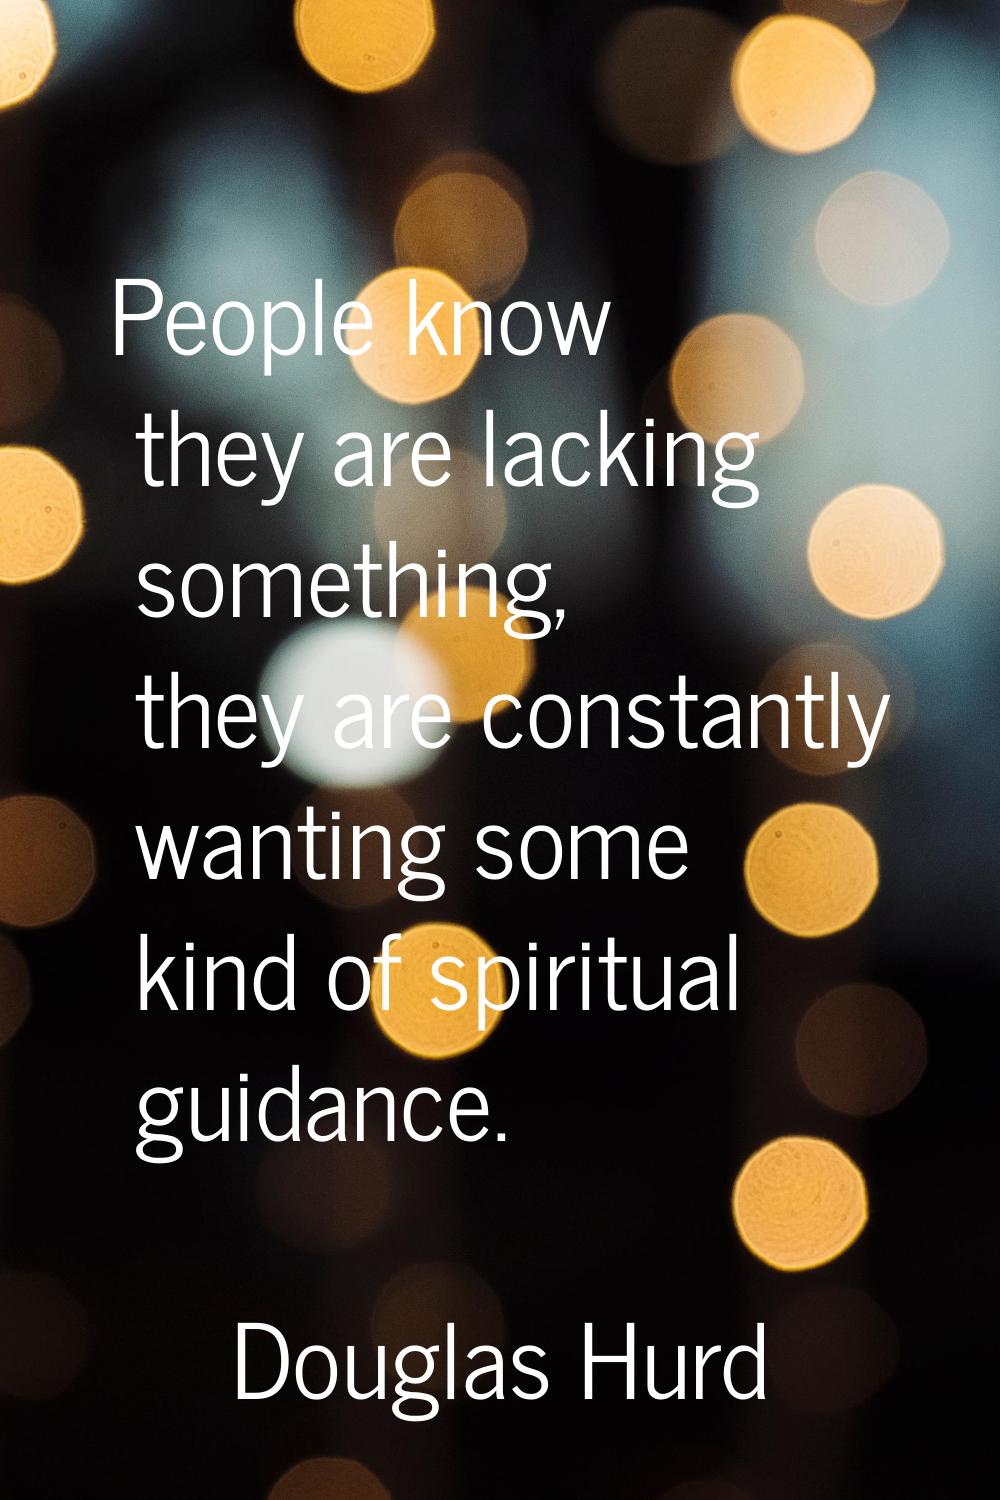 People know they are lacking something, they are constantly wanting some kind of spiritual guidance